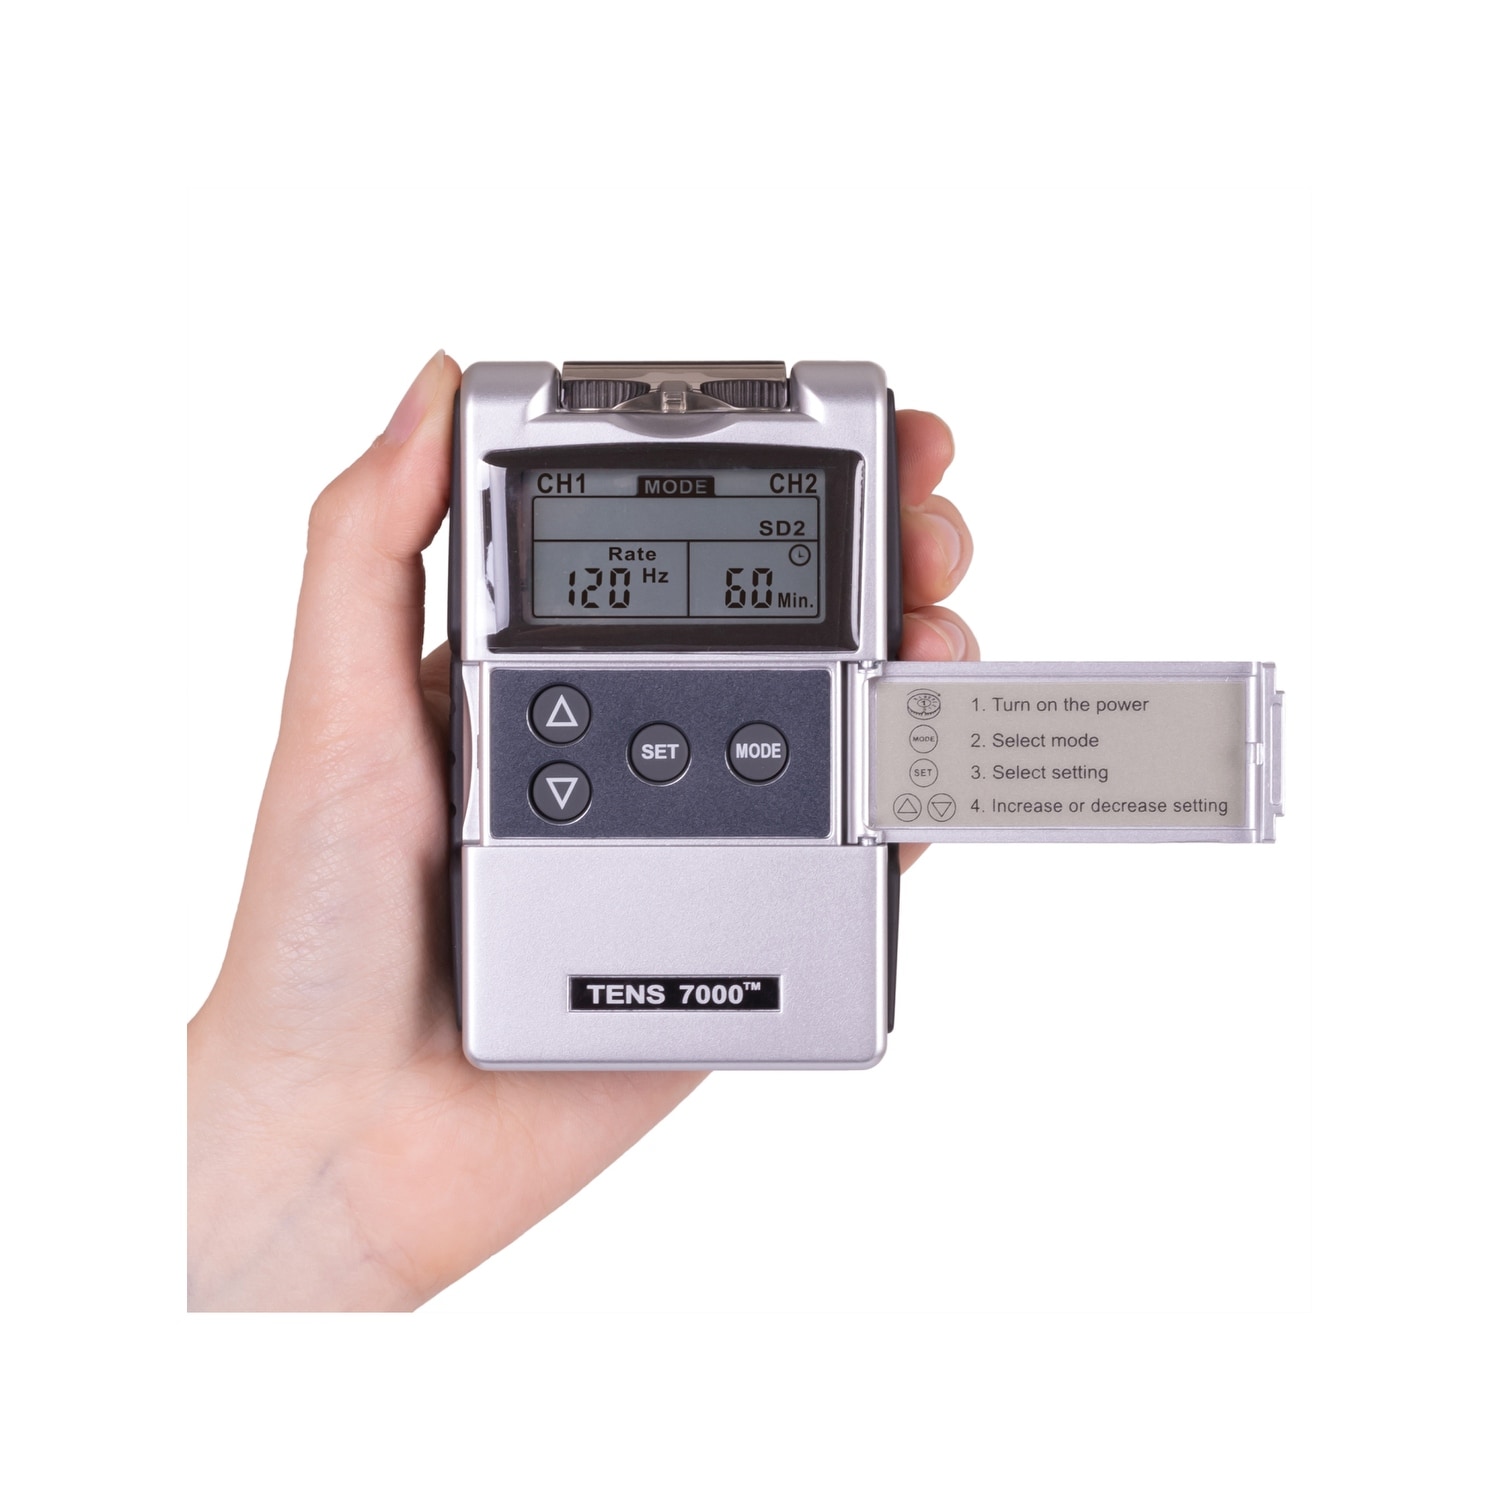 https://ak1.ostkcdn.com/images/products/is/images/direct/cdc2dbca5df4bd7a9cf7c0b8ef6b37c06e562b7b/TENS-7000-2nd-Edition-Digital-TENS-Unit-with-Accessories.jpg